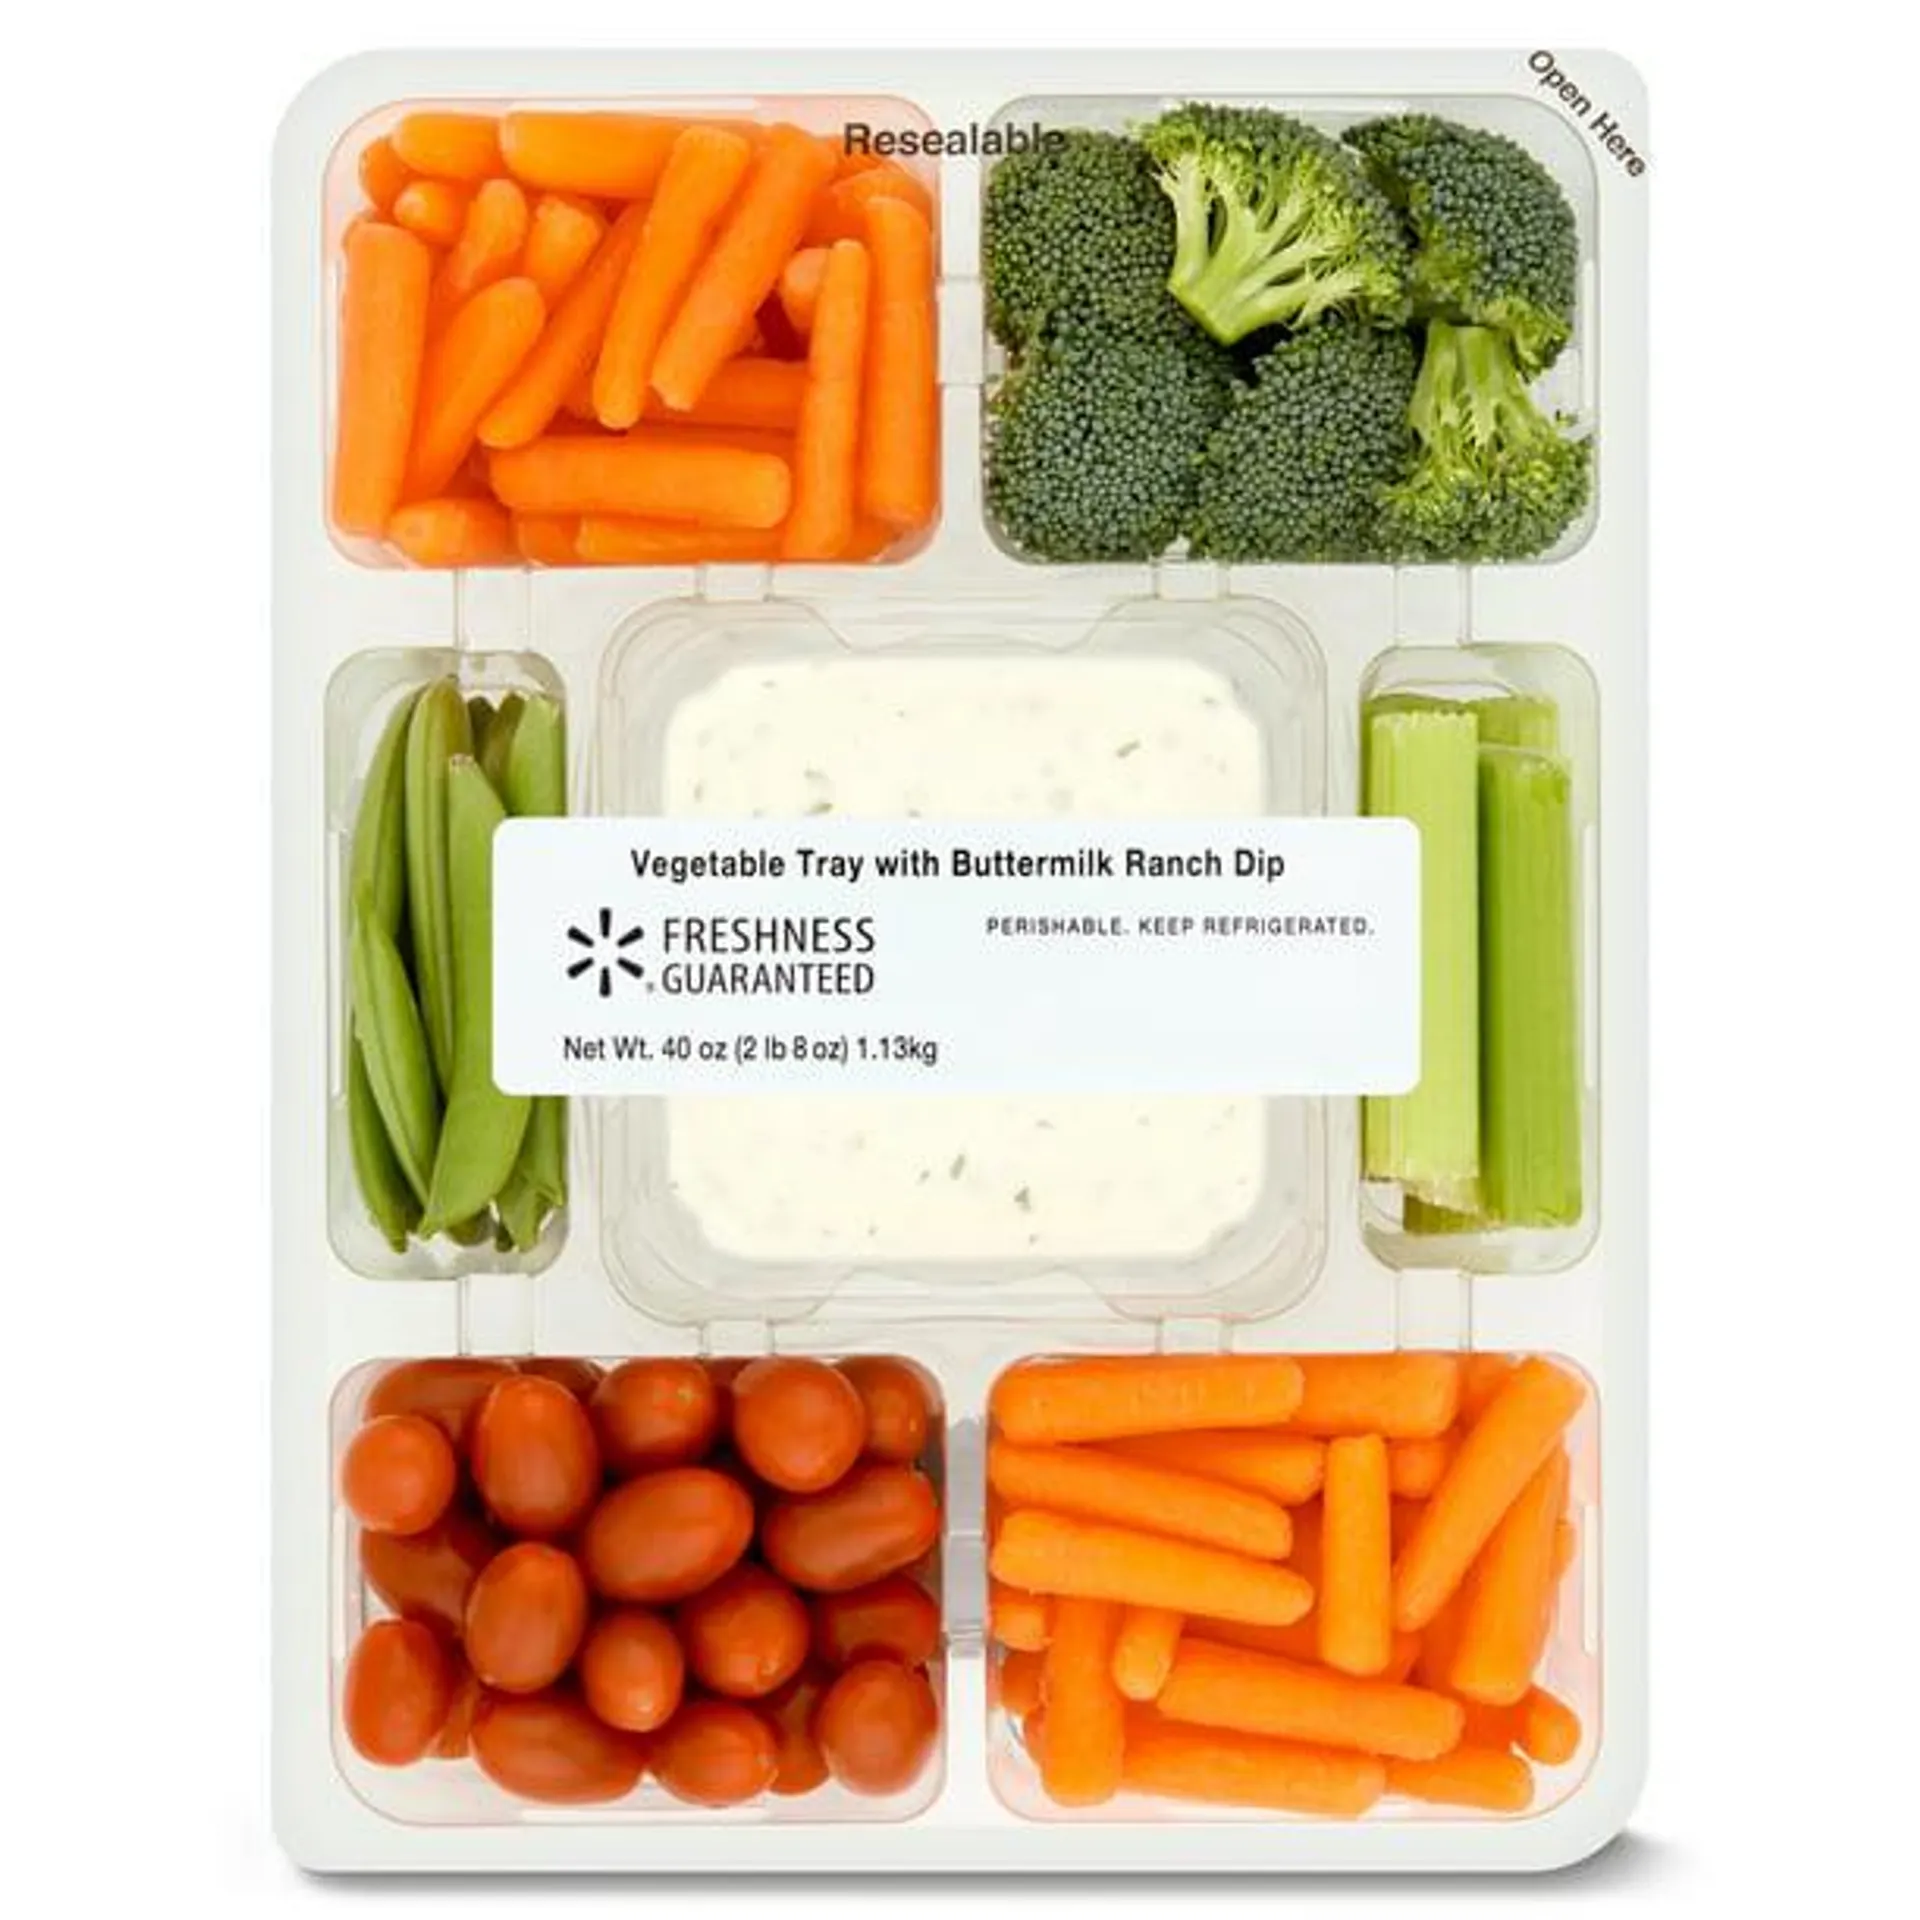 Freshness Guaranteed Vegetable Tray with Buttermilk Ranch Dip, 40 oz